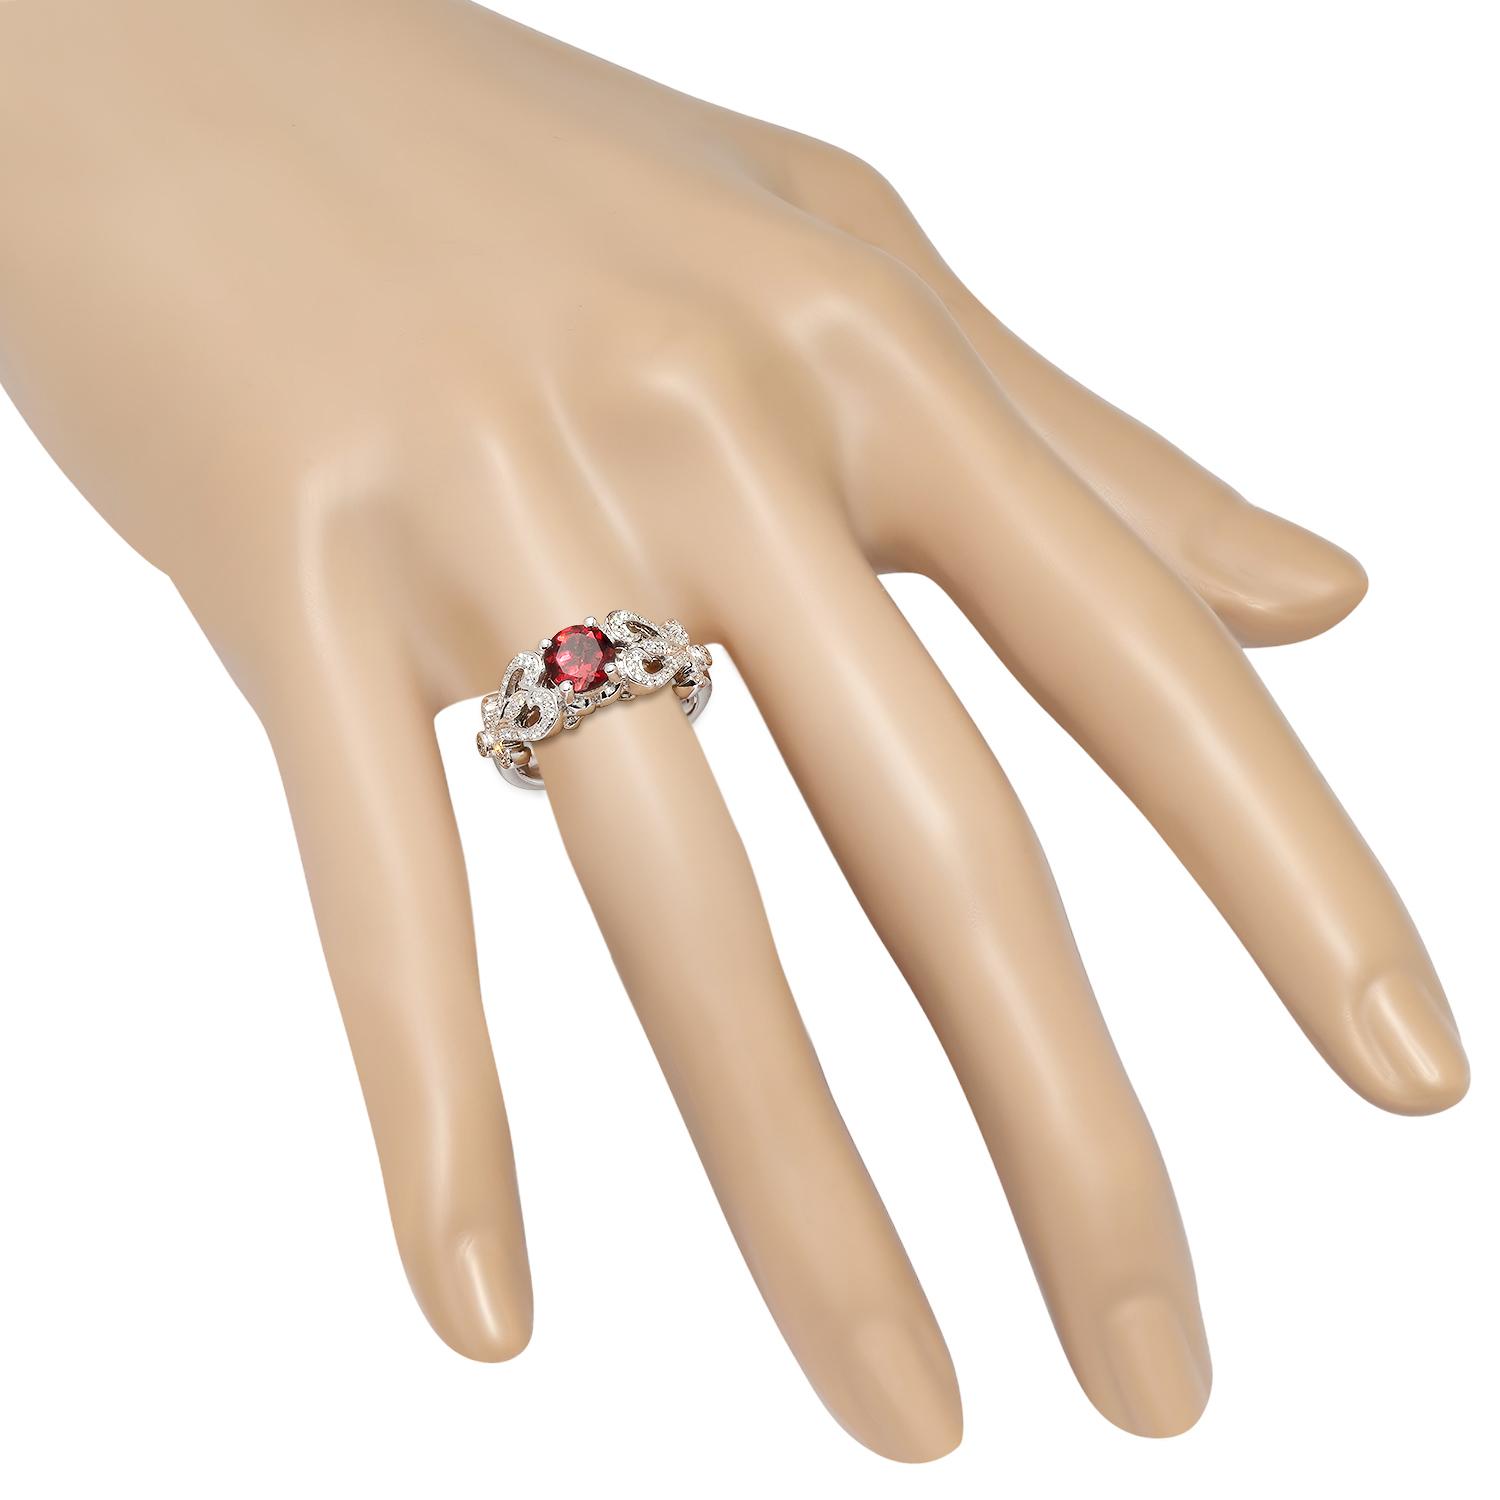 14K White Gold Setting with 1.08ct Garnet and 0.35ct Diamond Ring